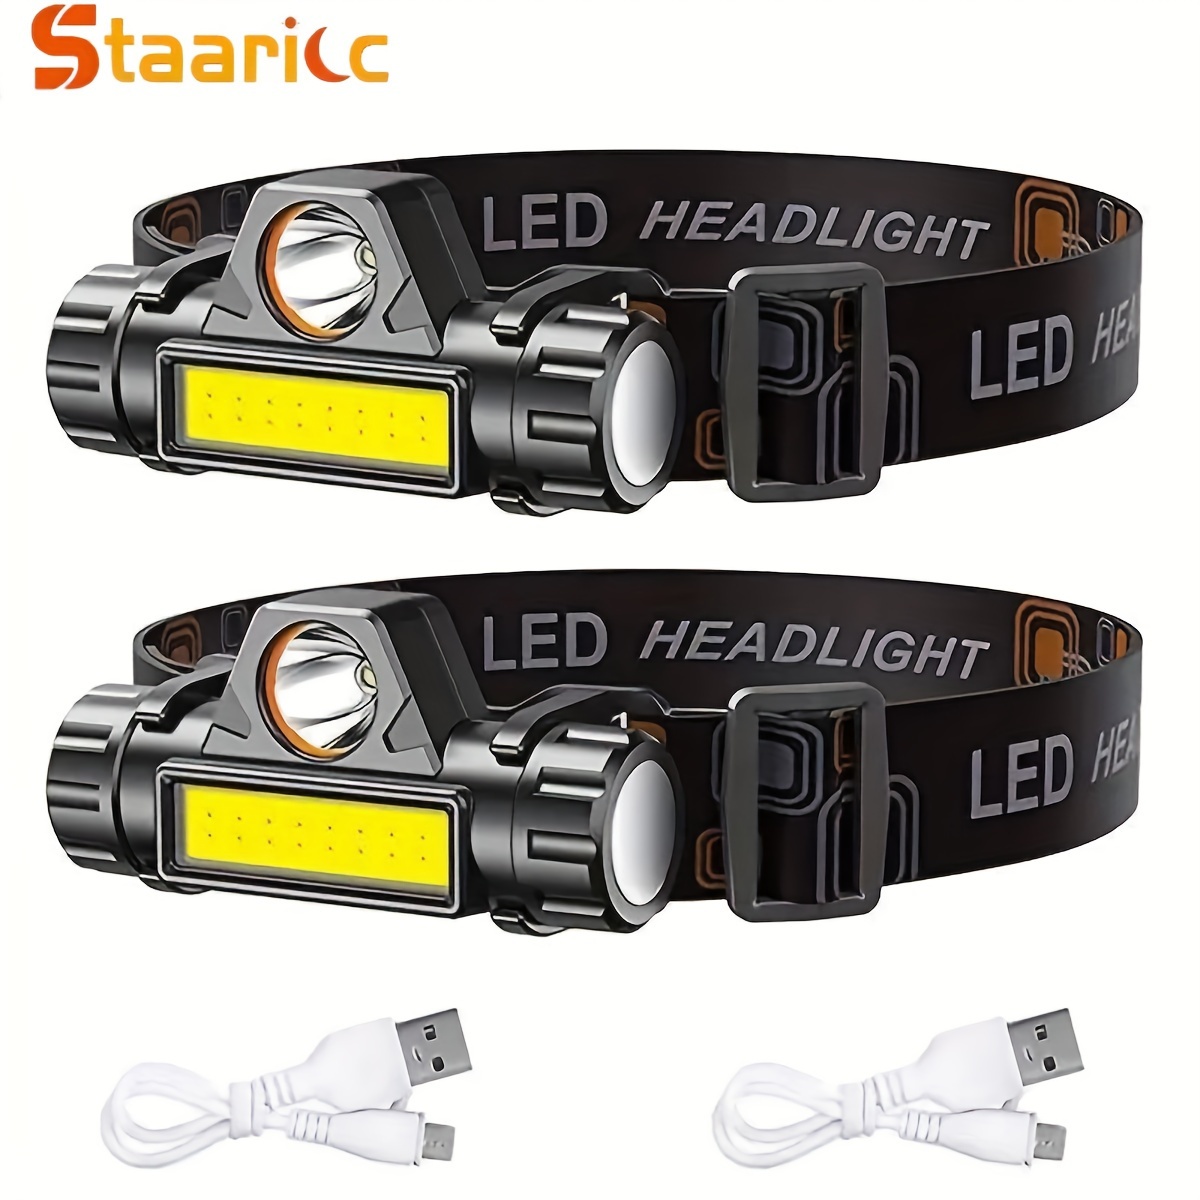 

1 Set Super Bright Rechargeable Xpe Spotlight + Cob Floodlight Headlamp, With Magnetic Outdoor , For Camping, Fishing, Hiking, Emergency Rescue